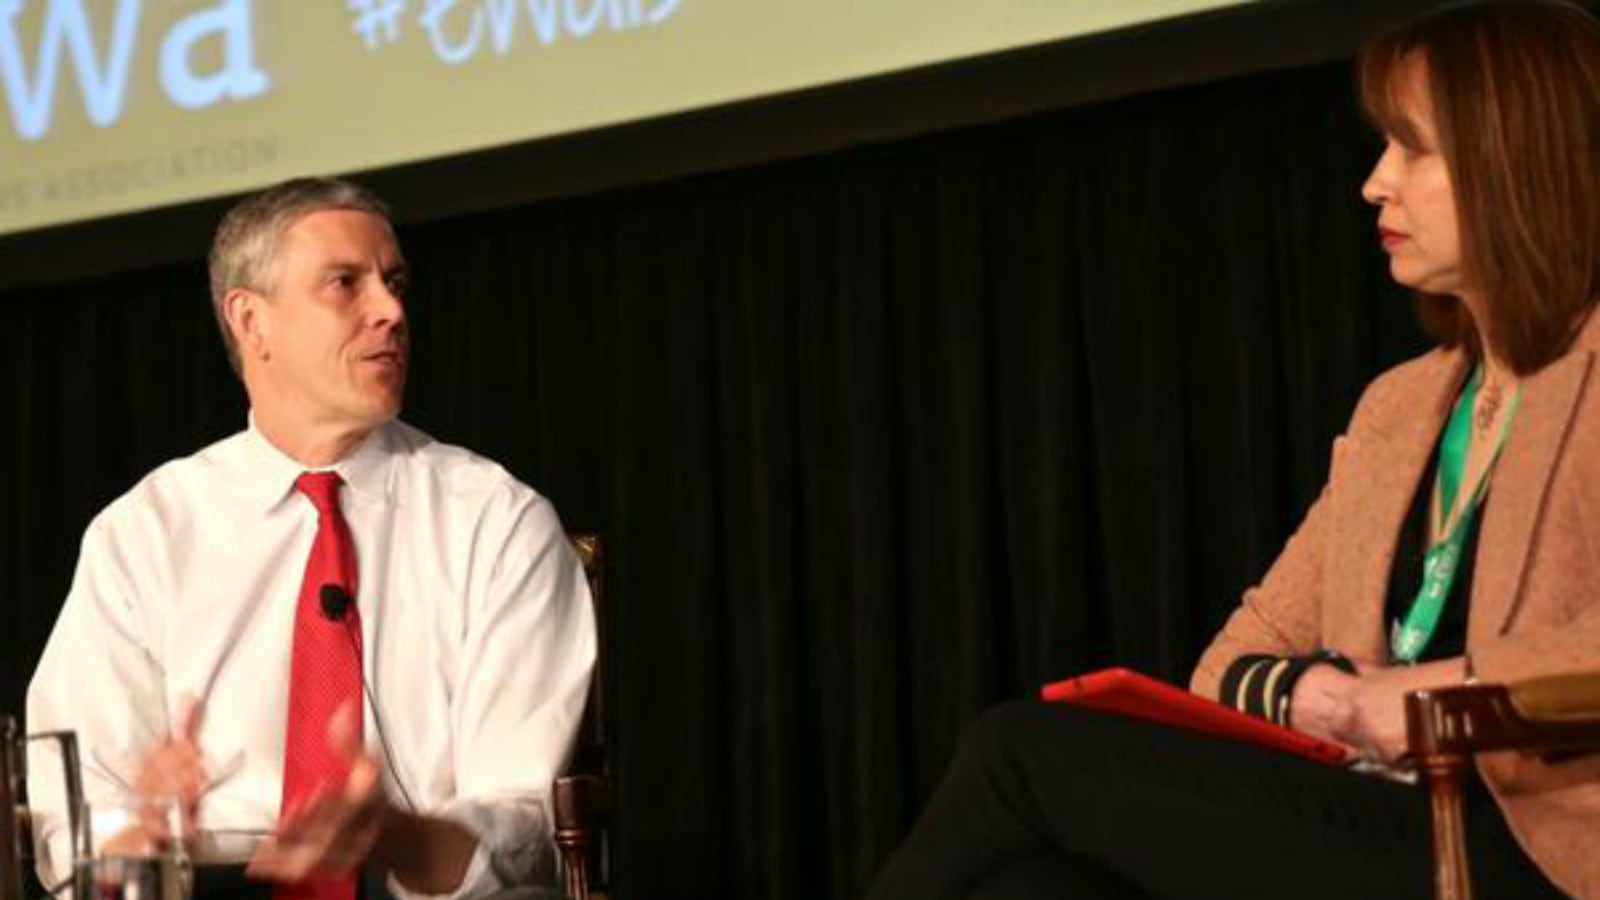 U.S. Education Secretary Arne Duncan spoke with New York Times reporter Motoko Rich during a public discussion at the Education Writers Assocation's National Seminar in Chicago on Tuesday.